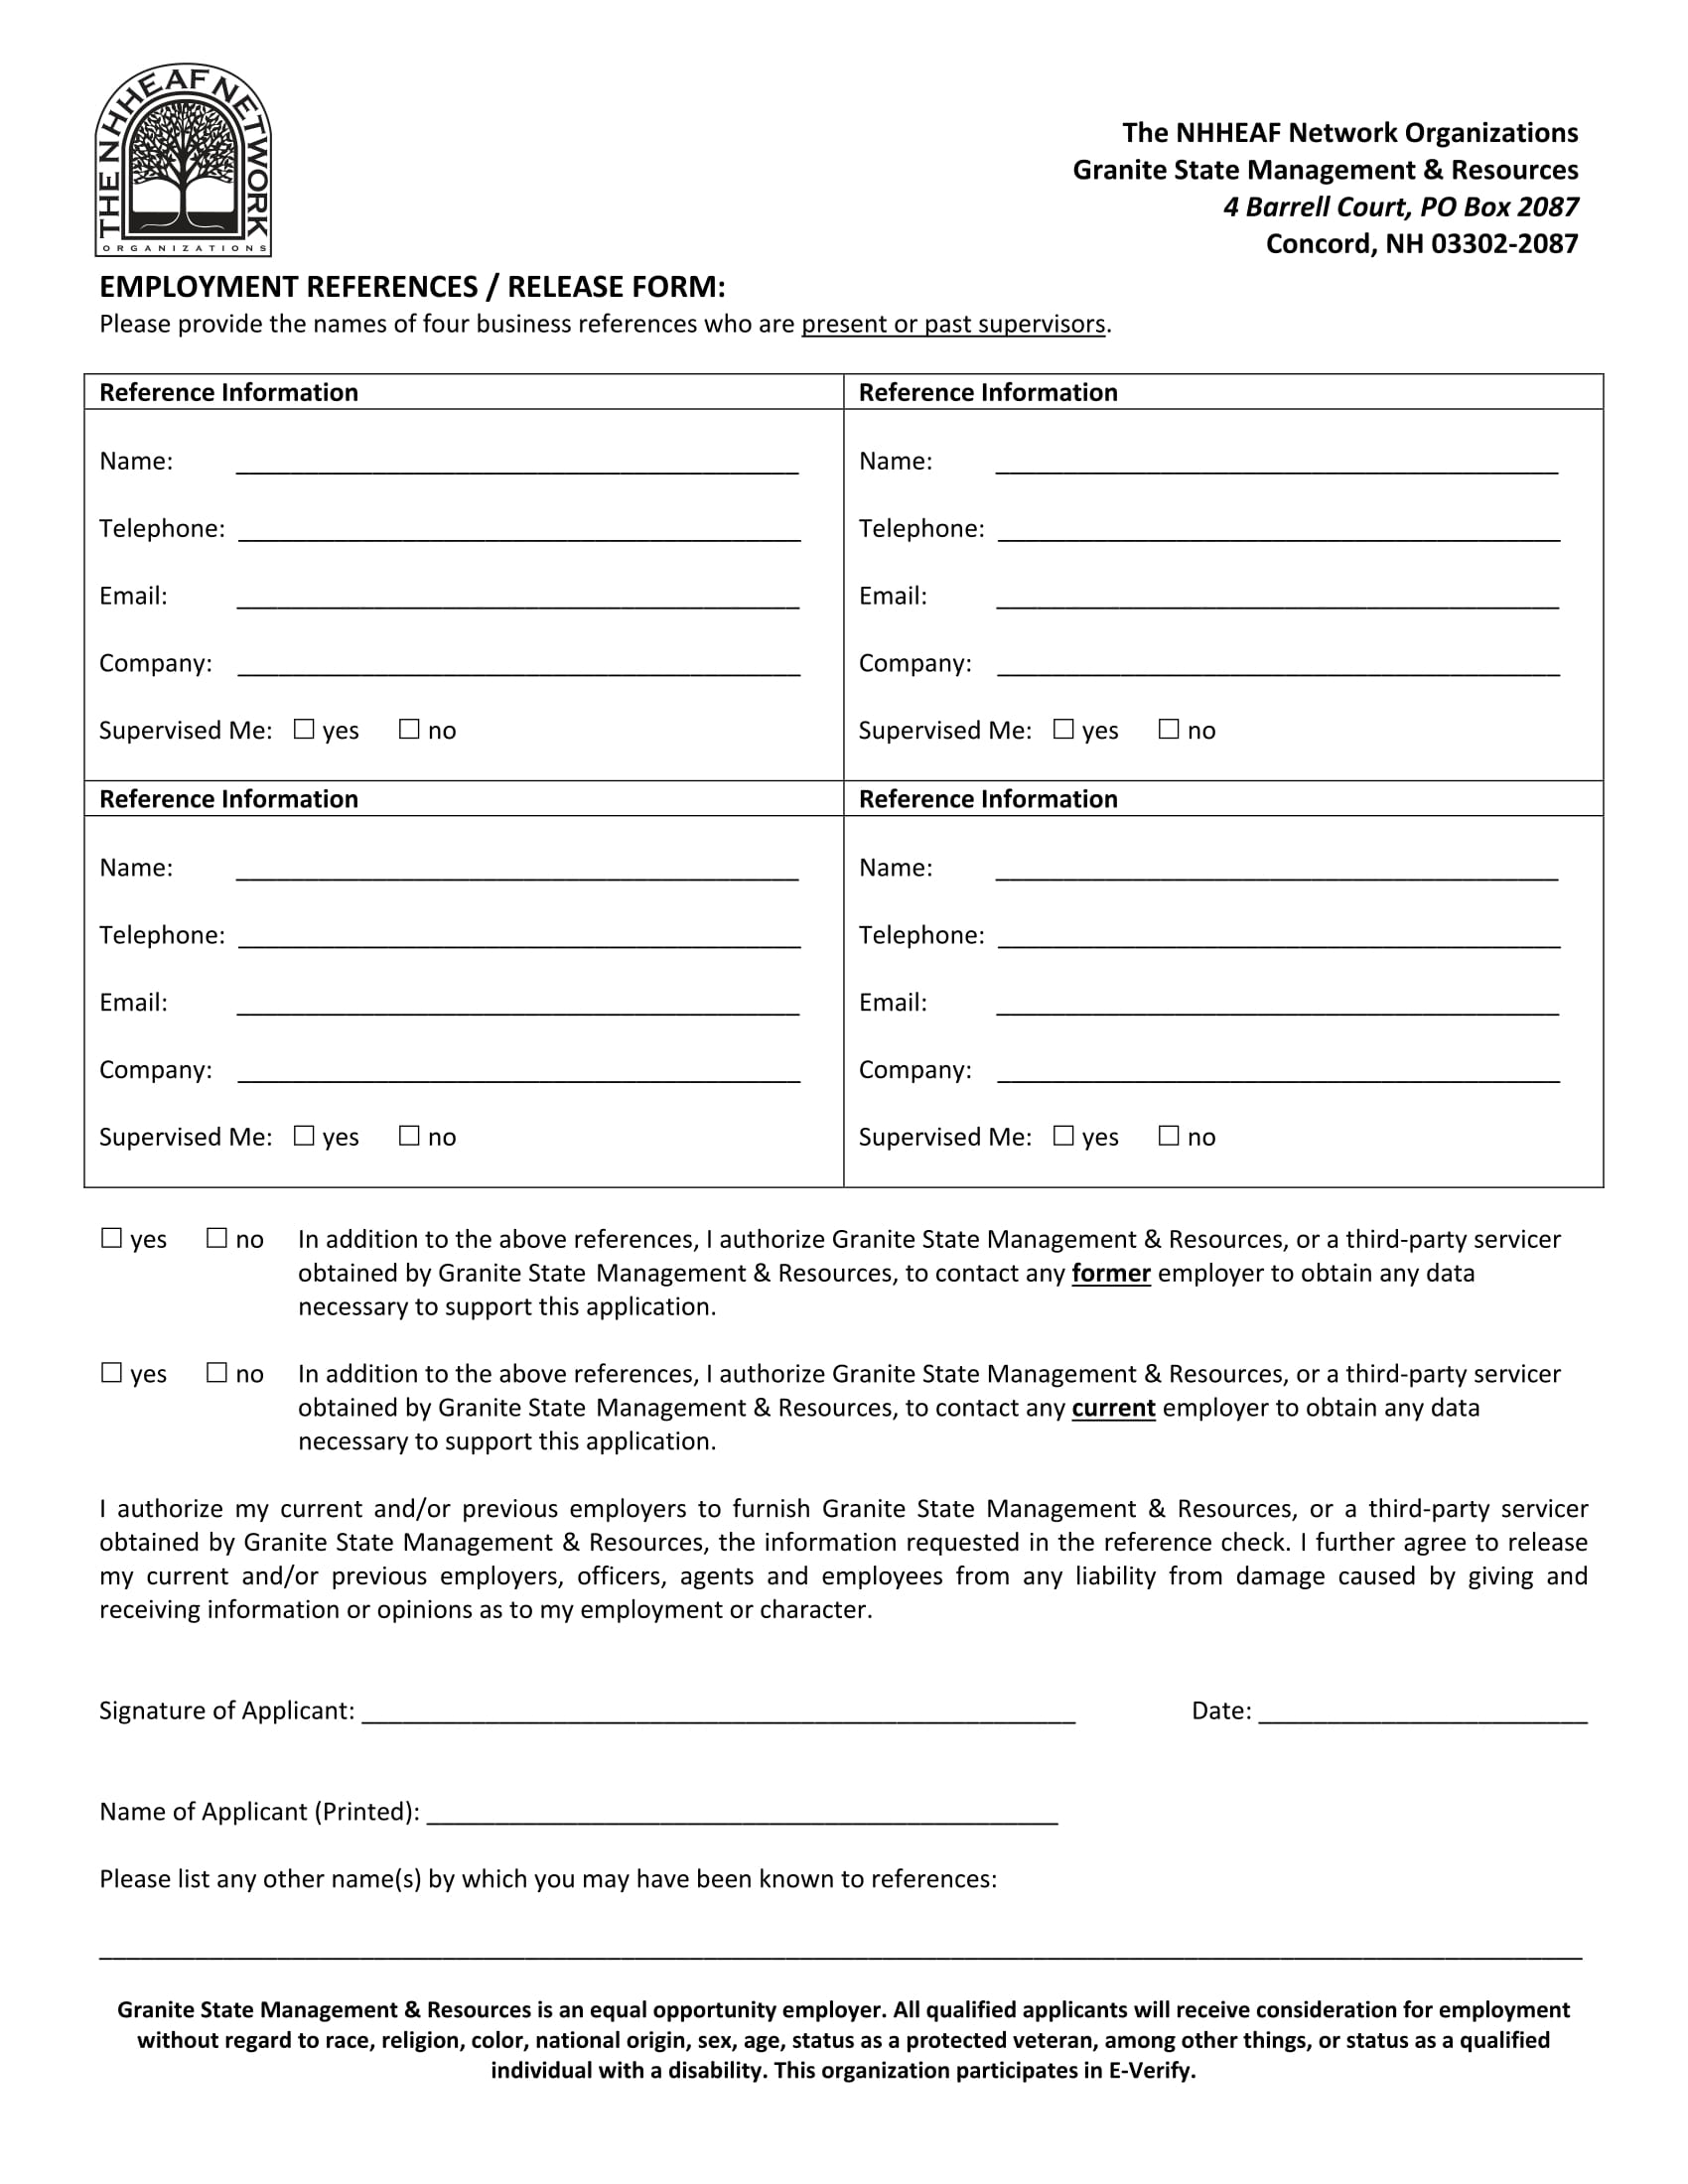 employment references release form 1